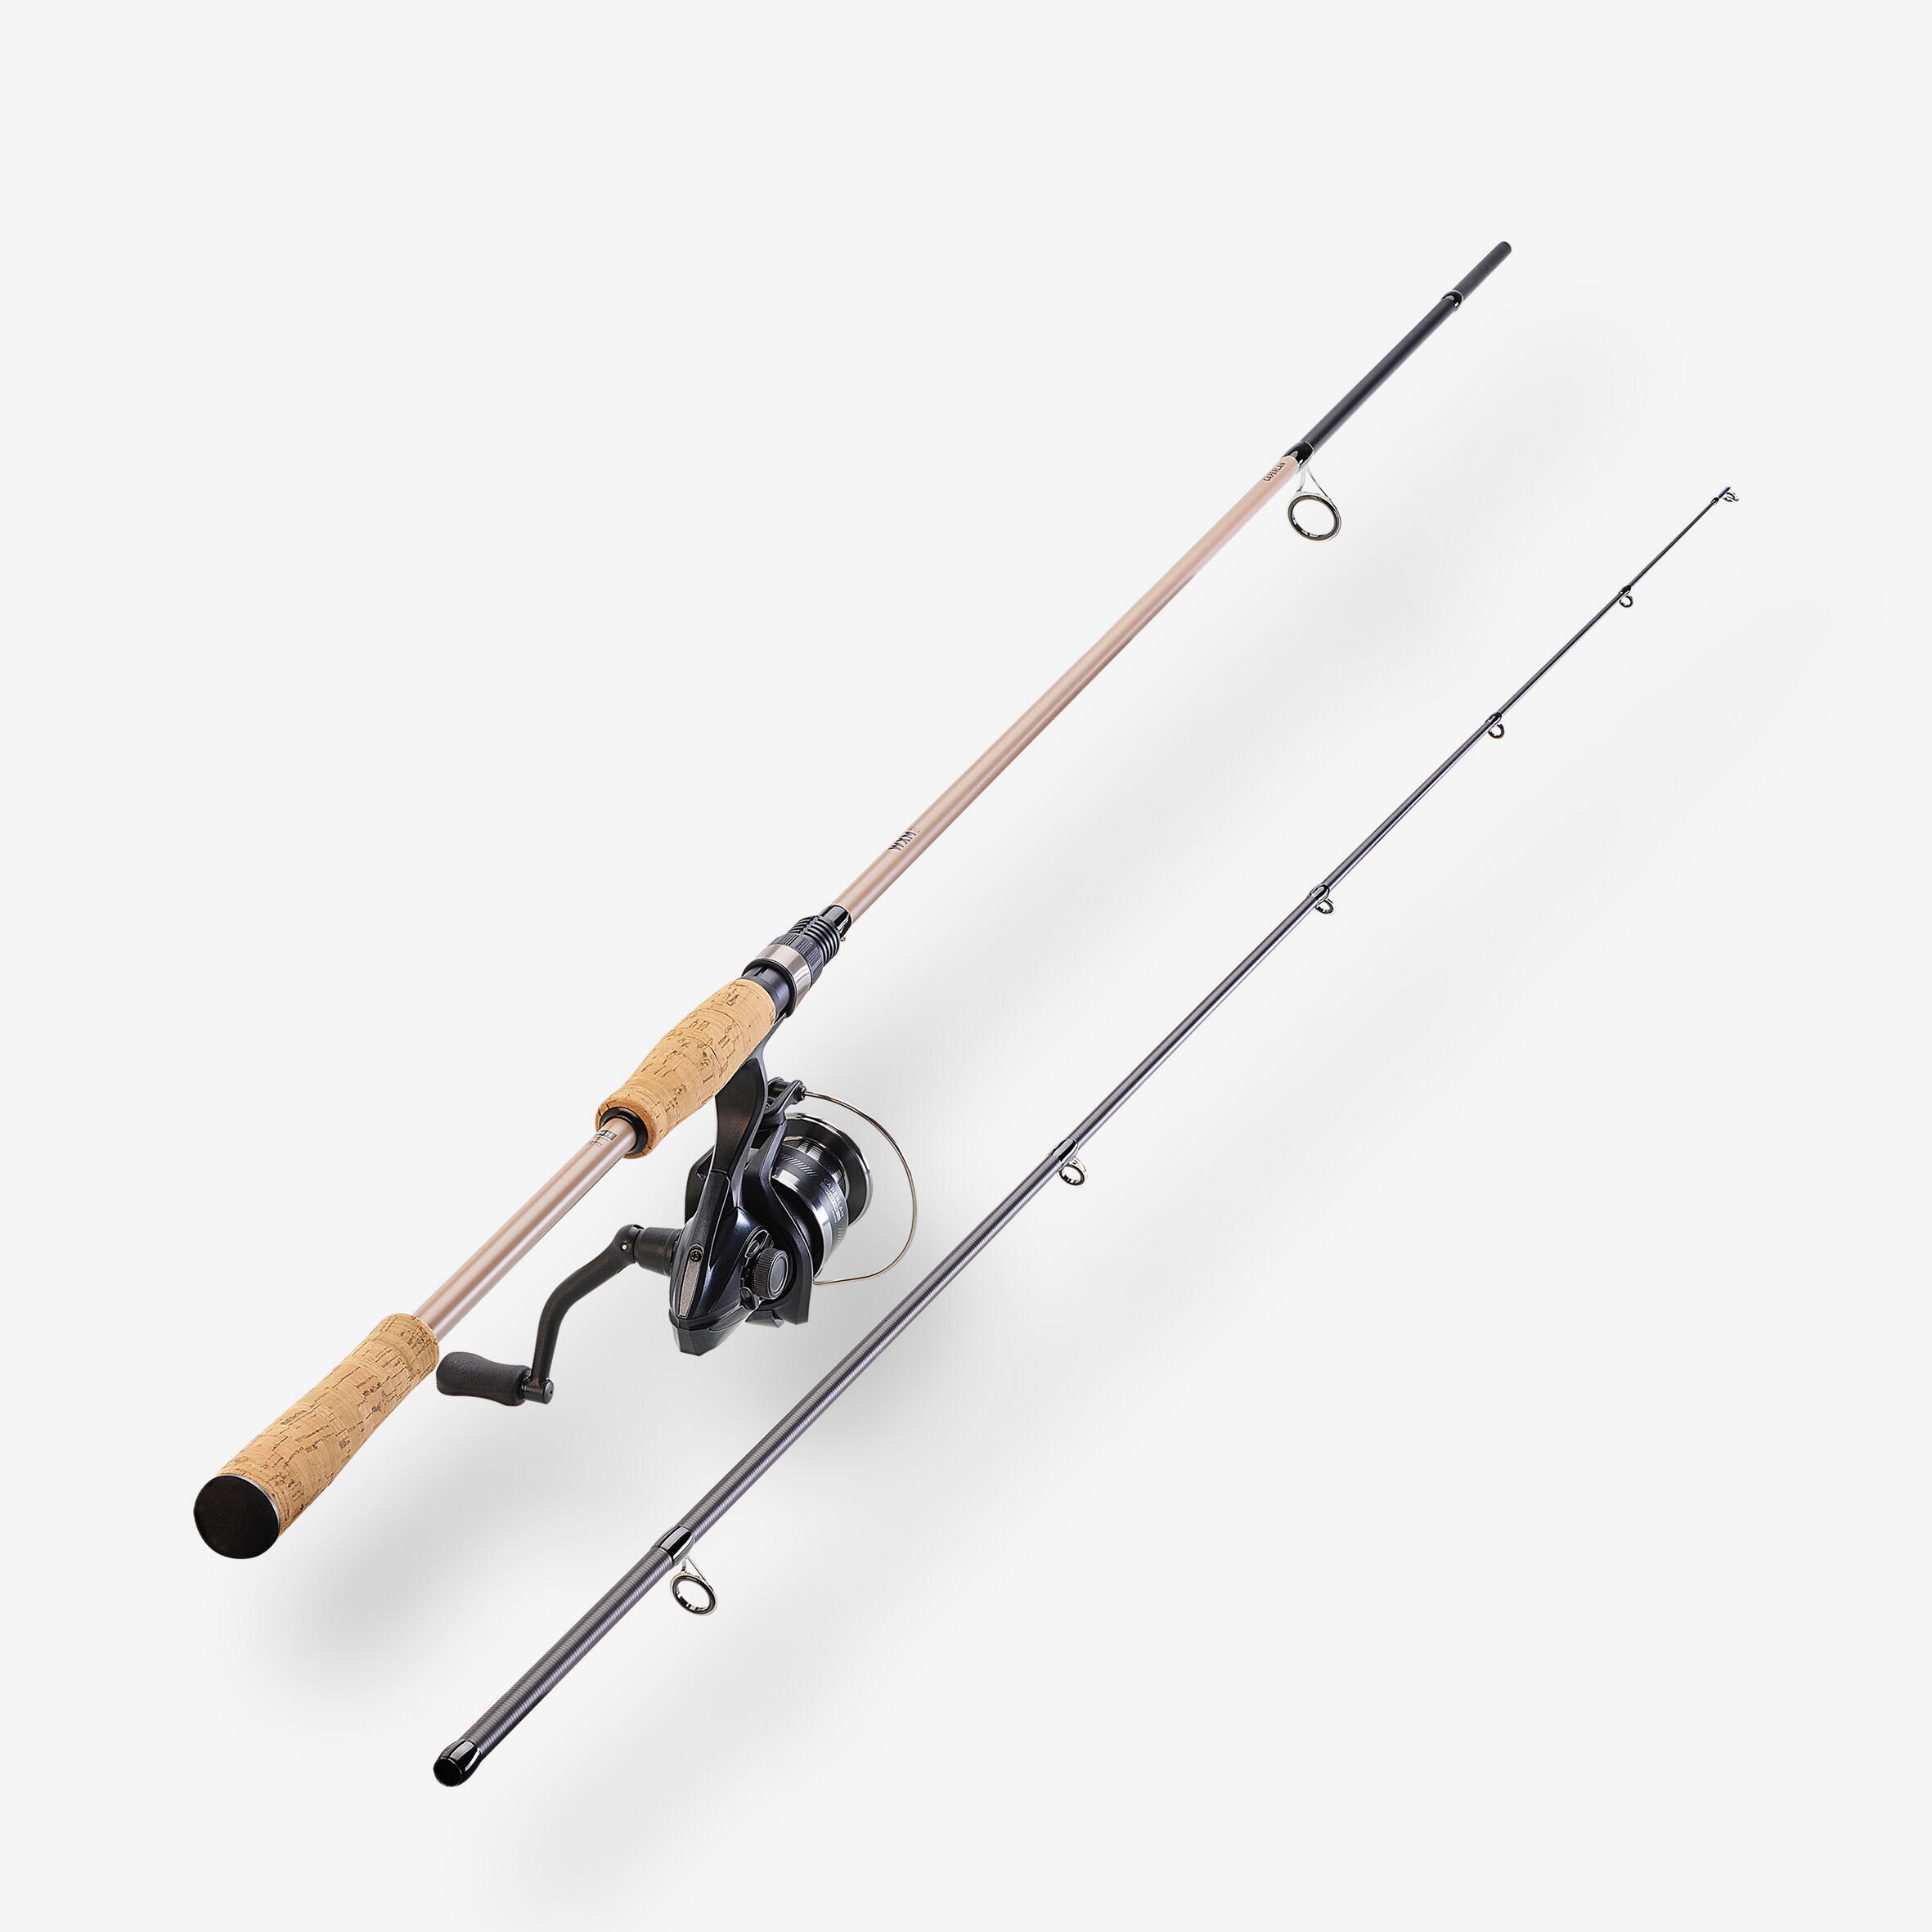 Matched Pair of Surf Bait Runner Combos - sporting goods - by